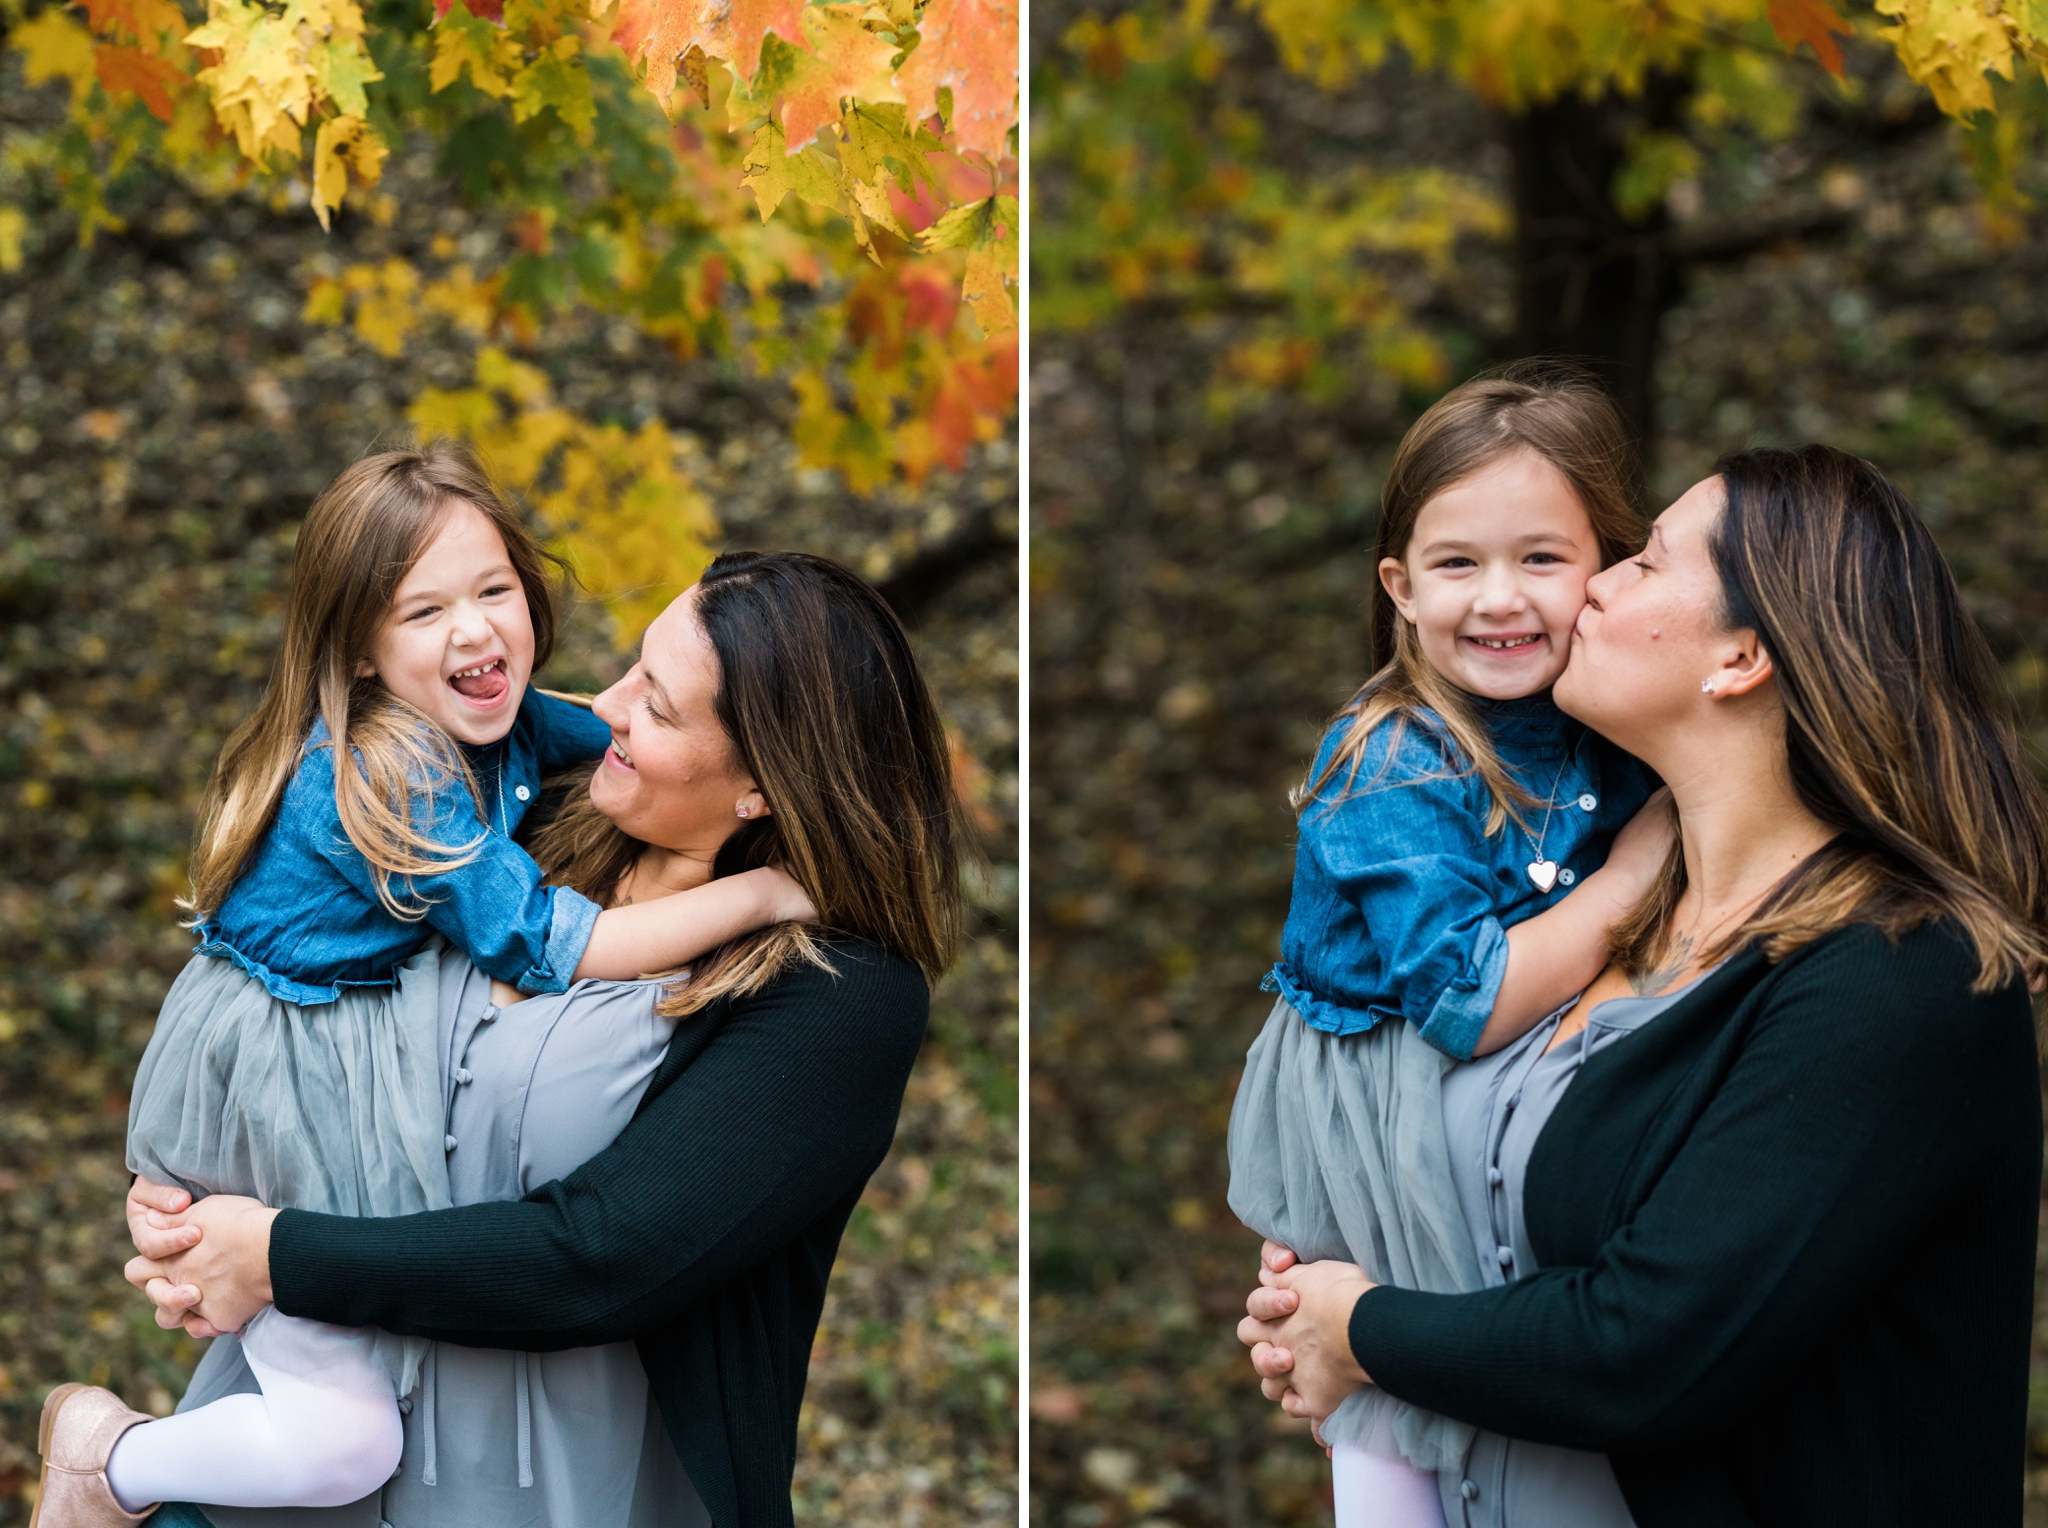 Emily Grace Photography, Lancaster PA Lifestyle Photographer, Marietta PA Photos, Fall Family Portraits with Dog